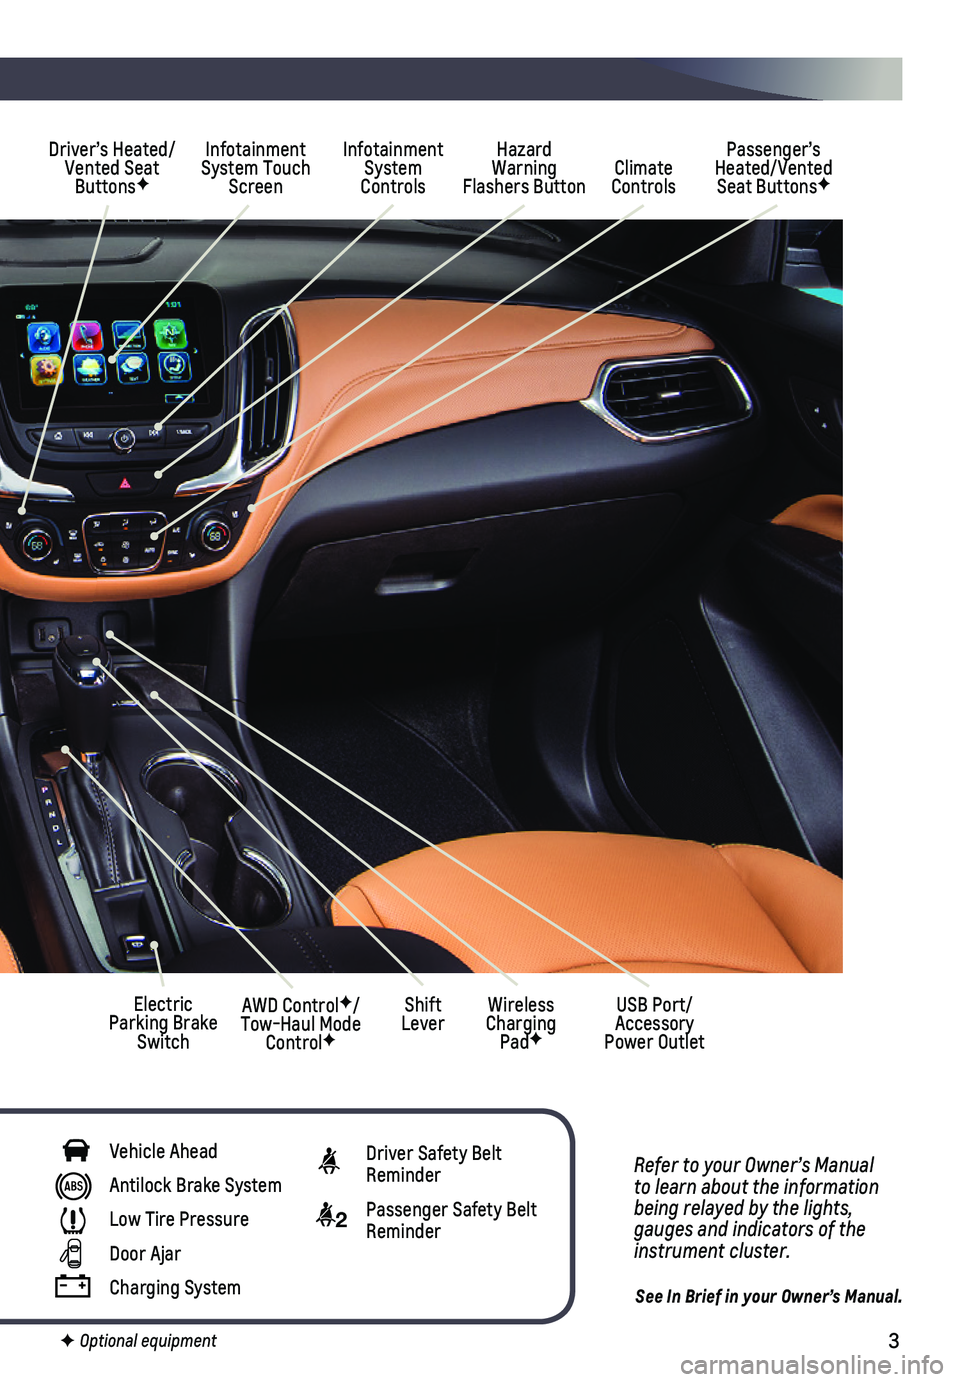 CHEVROLET EQUINOX 2018  Get To Know Guide 3
Refer to your Owner’s Manual to learn about the information being relayed by the lights, gauges and indicators of the instrument cluster.
See In Brief in your Owner’s Manual.
F Optional equipmen